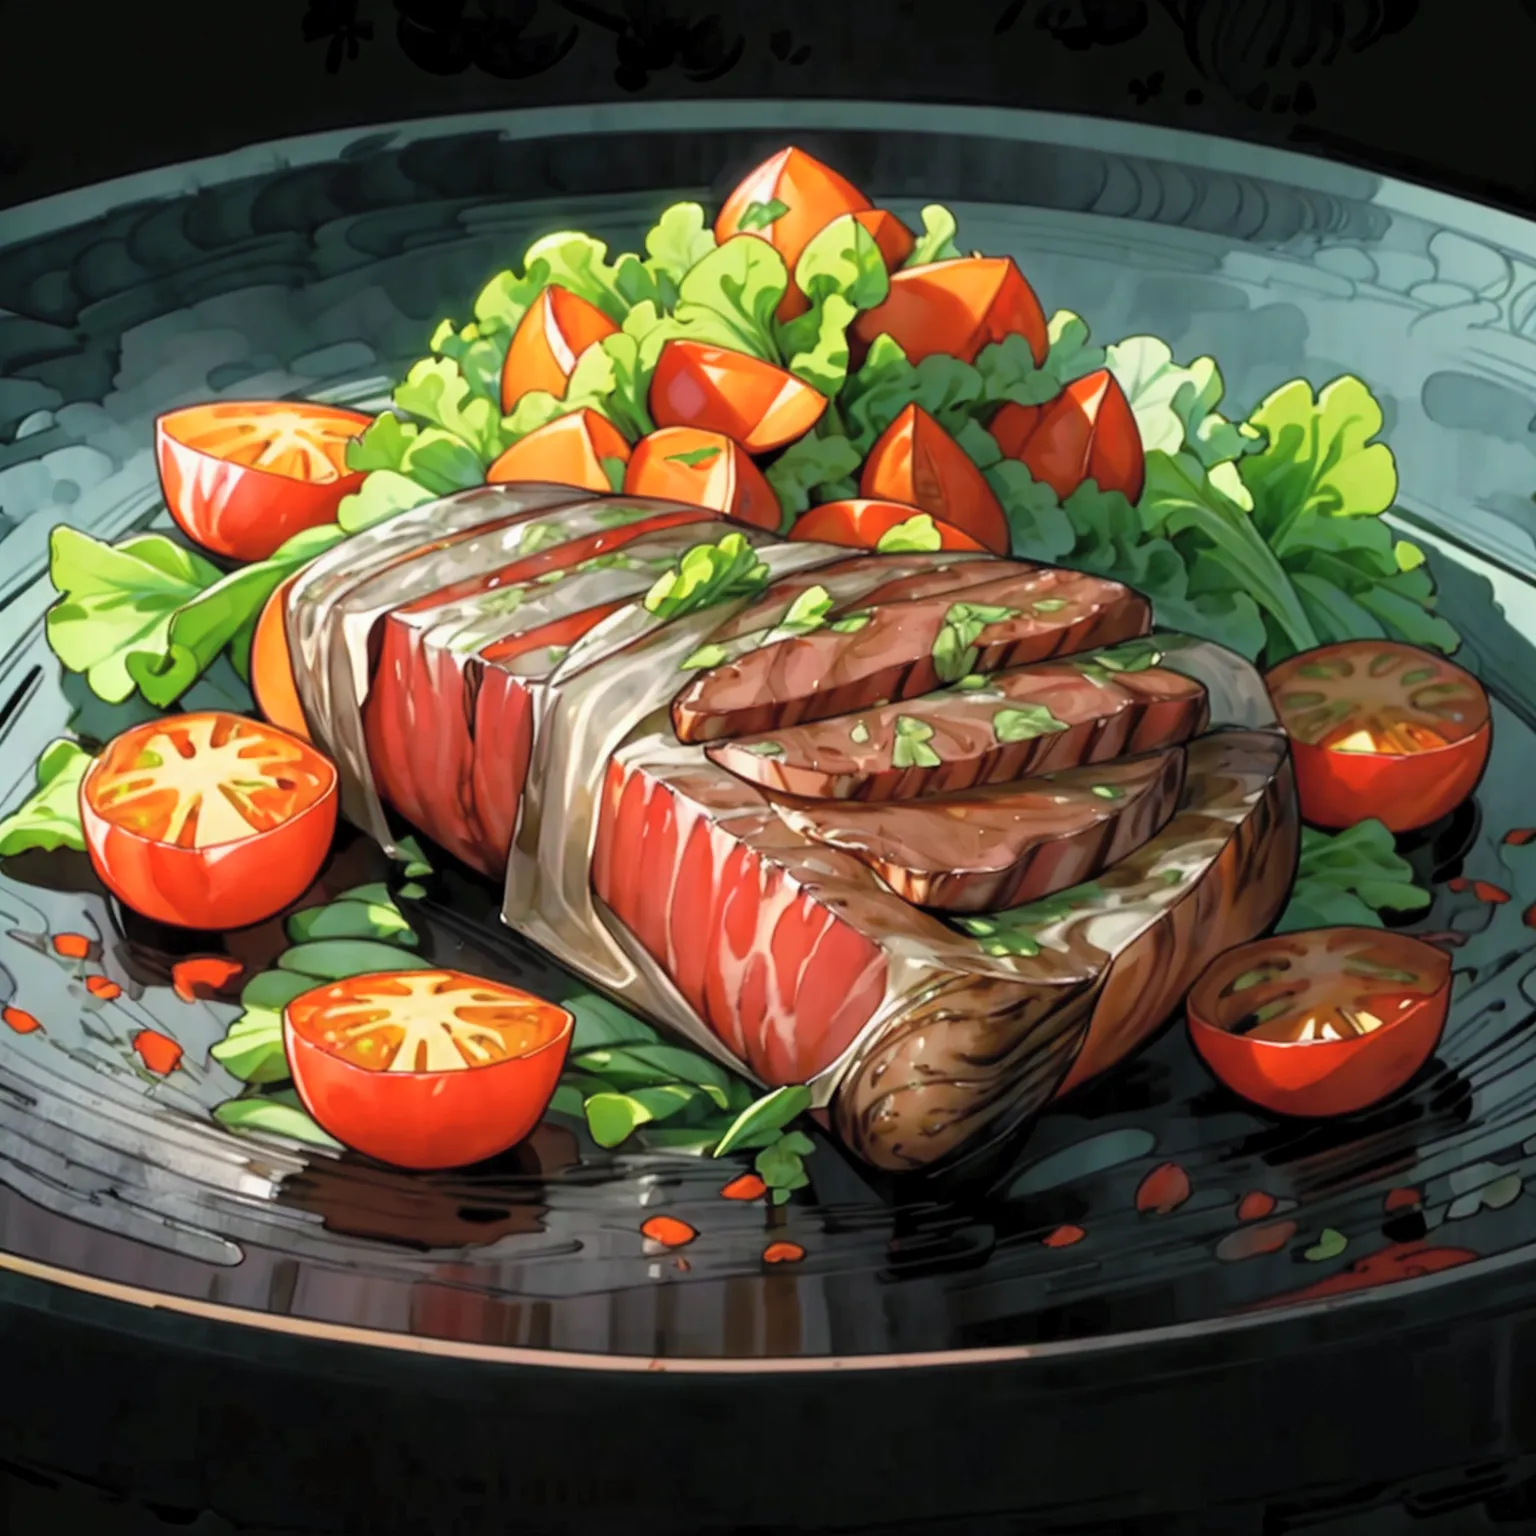 there is a delicious tenderloin steak and baked potatoes served on a hot black plate with slices of baked tomatoes and some gree...